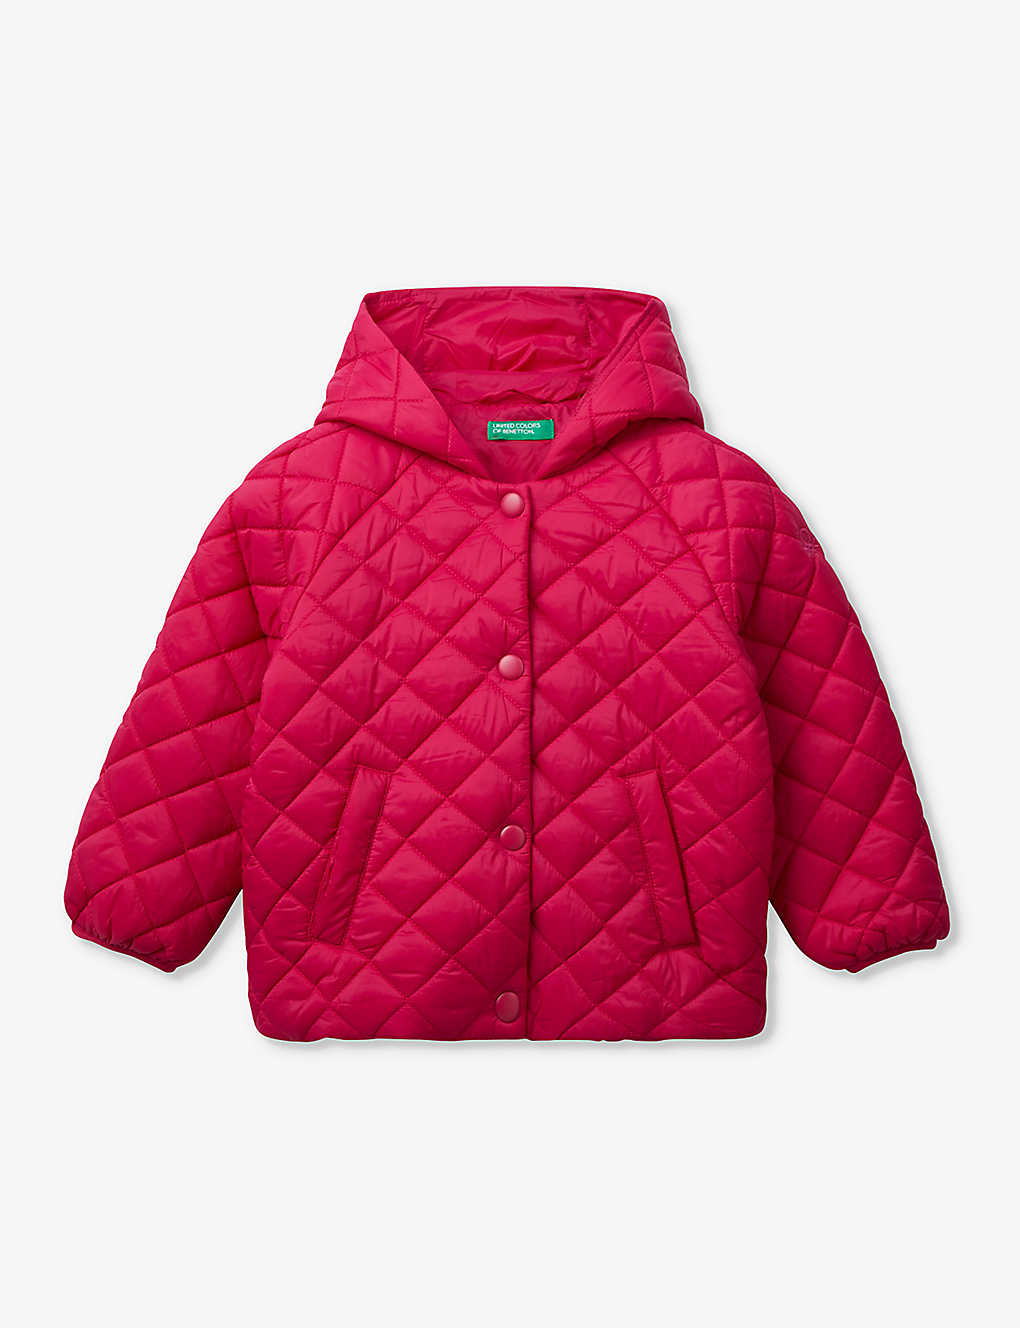 Benetton Boys Fucshia Pink Kids Logo-embroidered Quilted Hooded Shell Jacket 18 Months – 6 Years